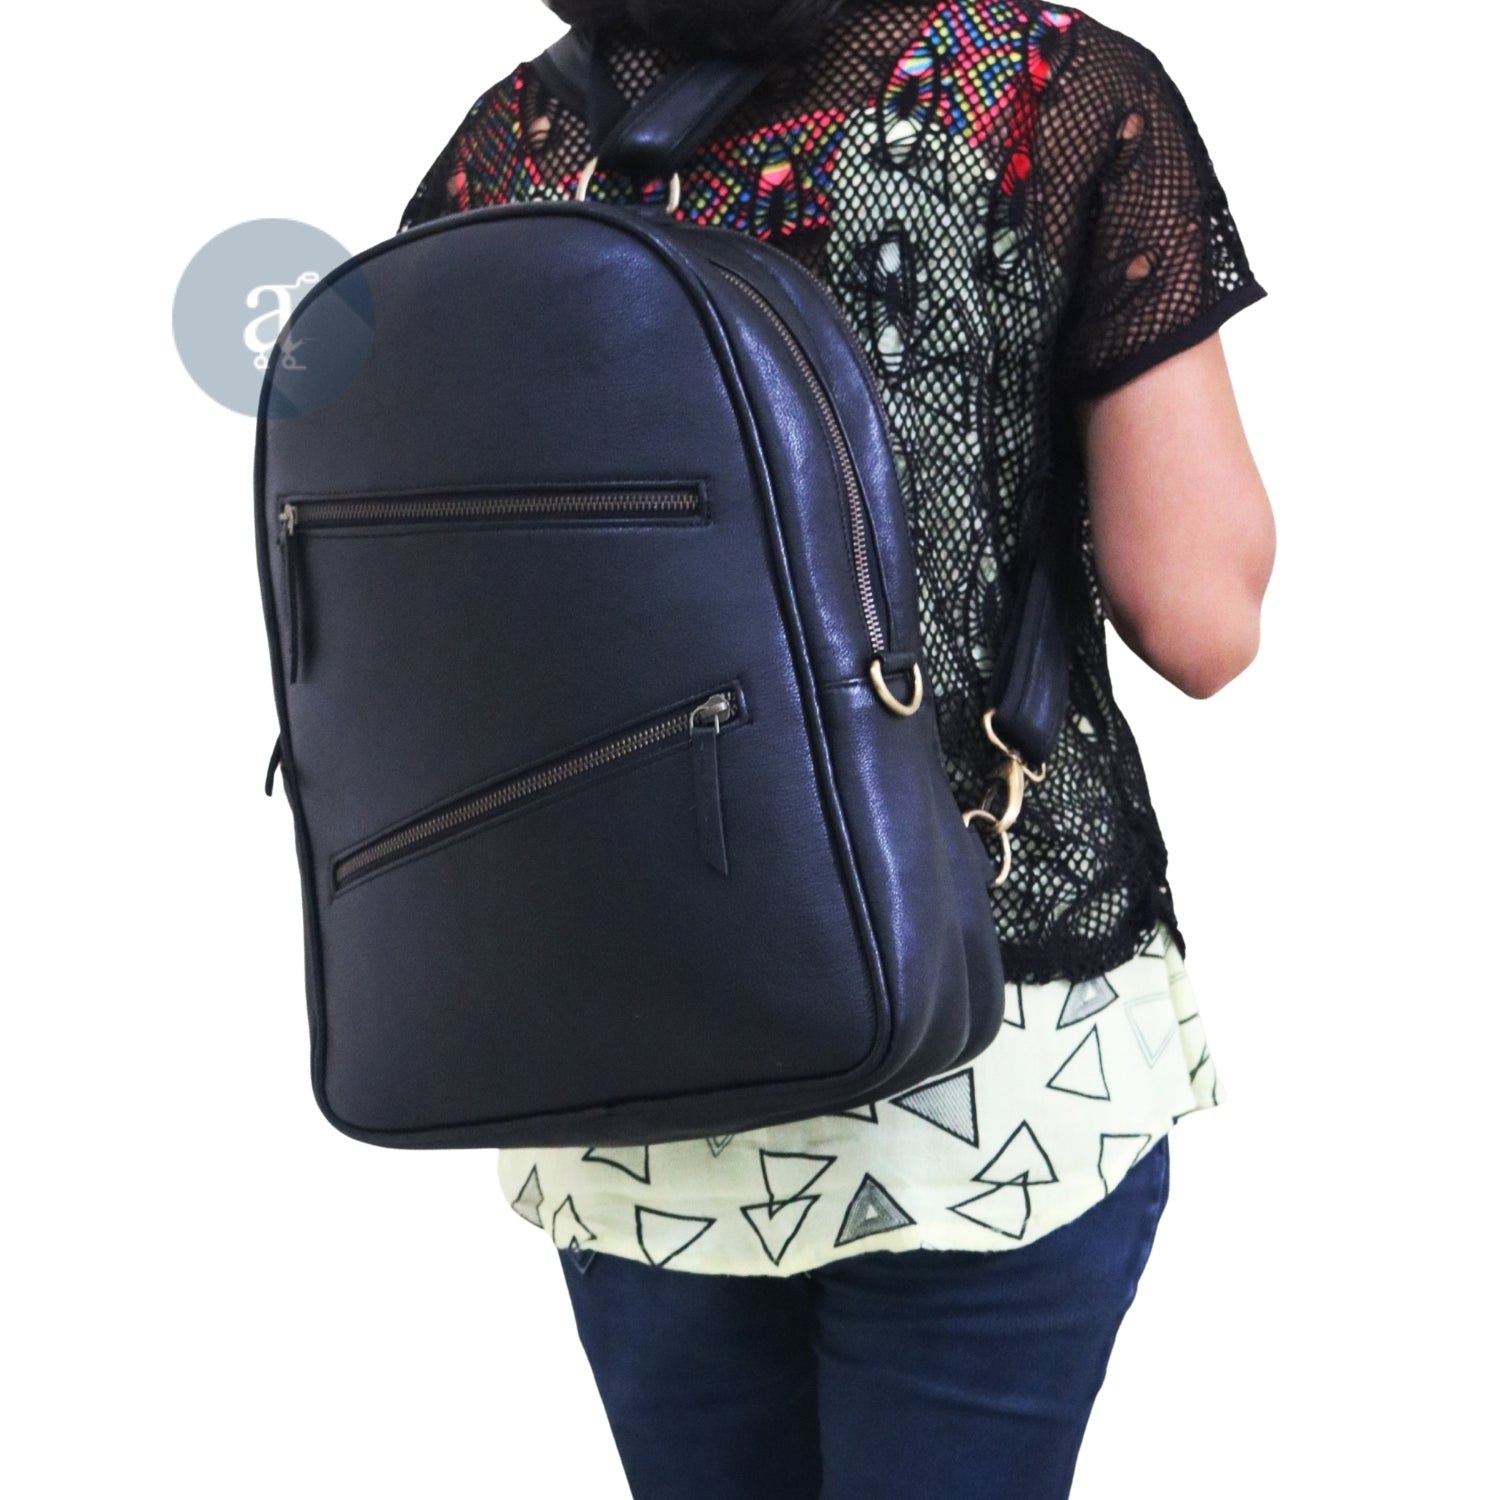 Women's Black Leather Backpack carrying staps